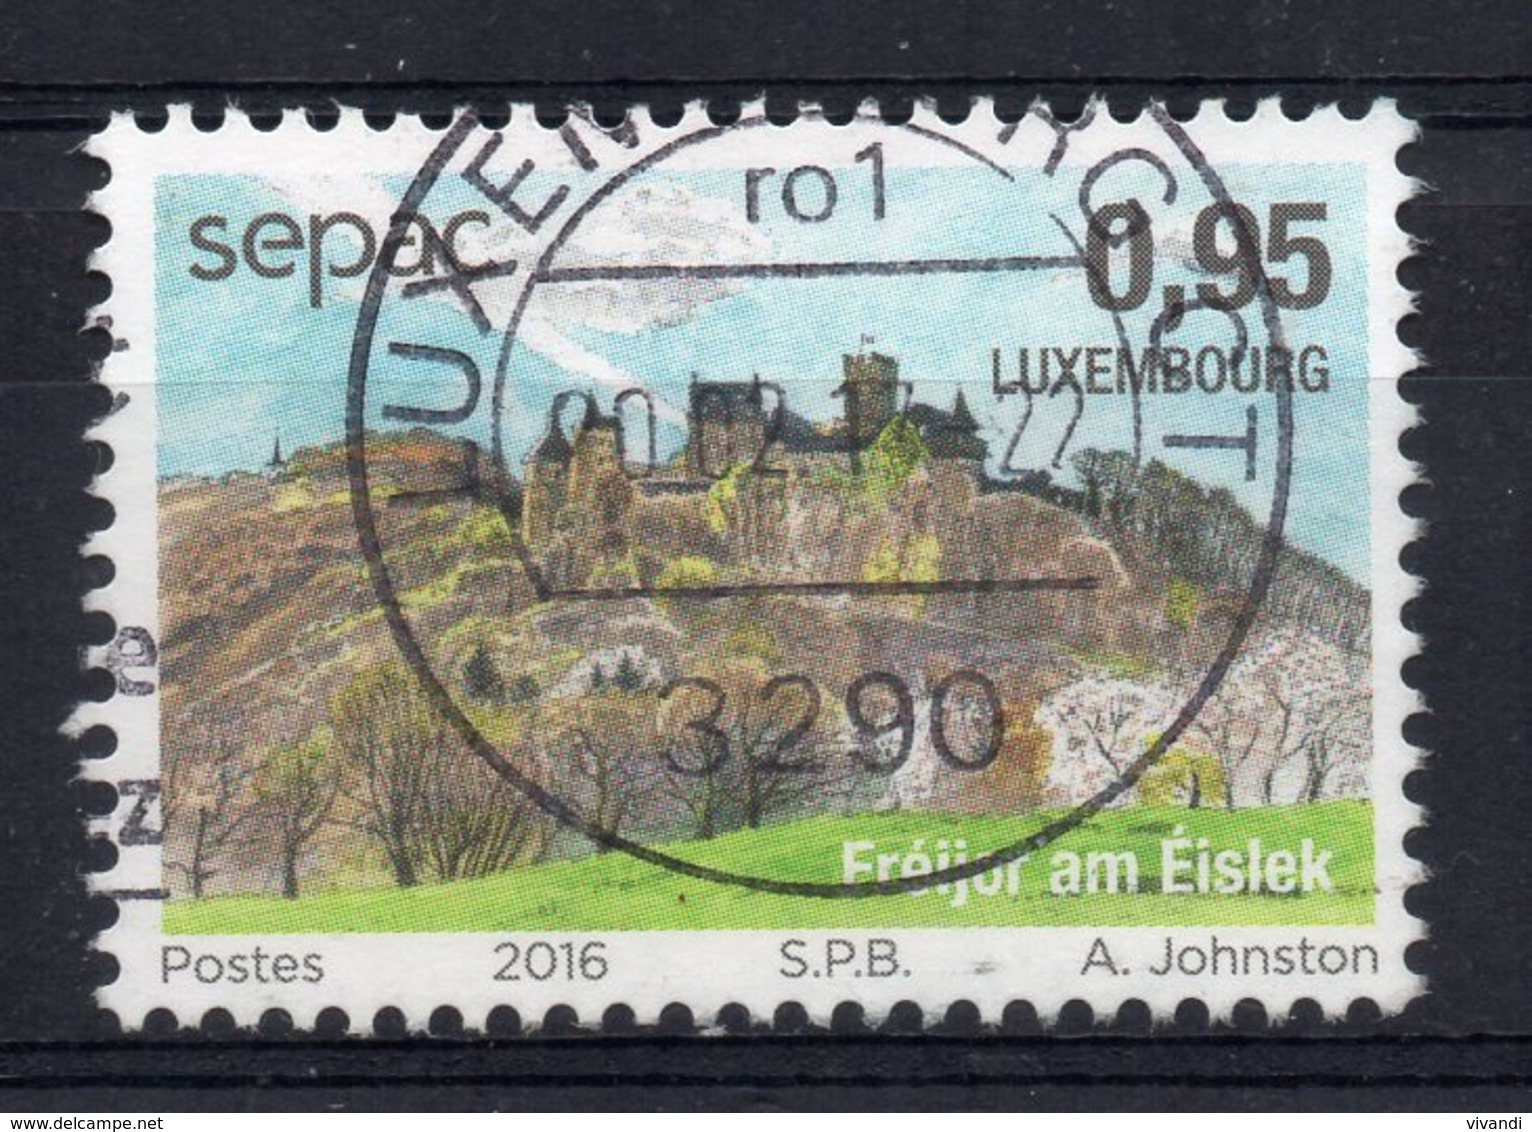 Luxembourg - 2016 - Sepac - Used - Used Stamps